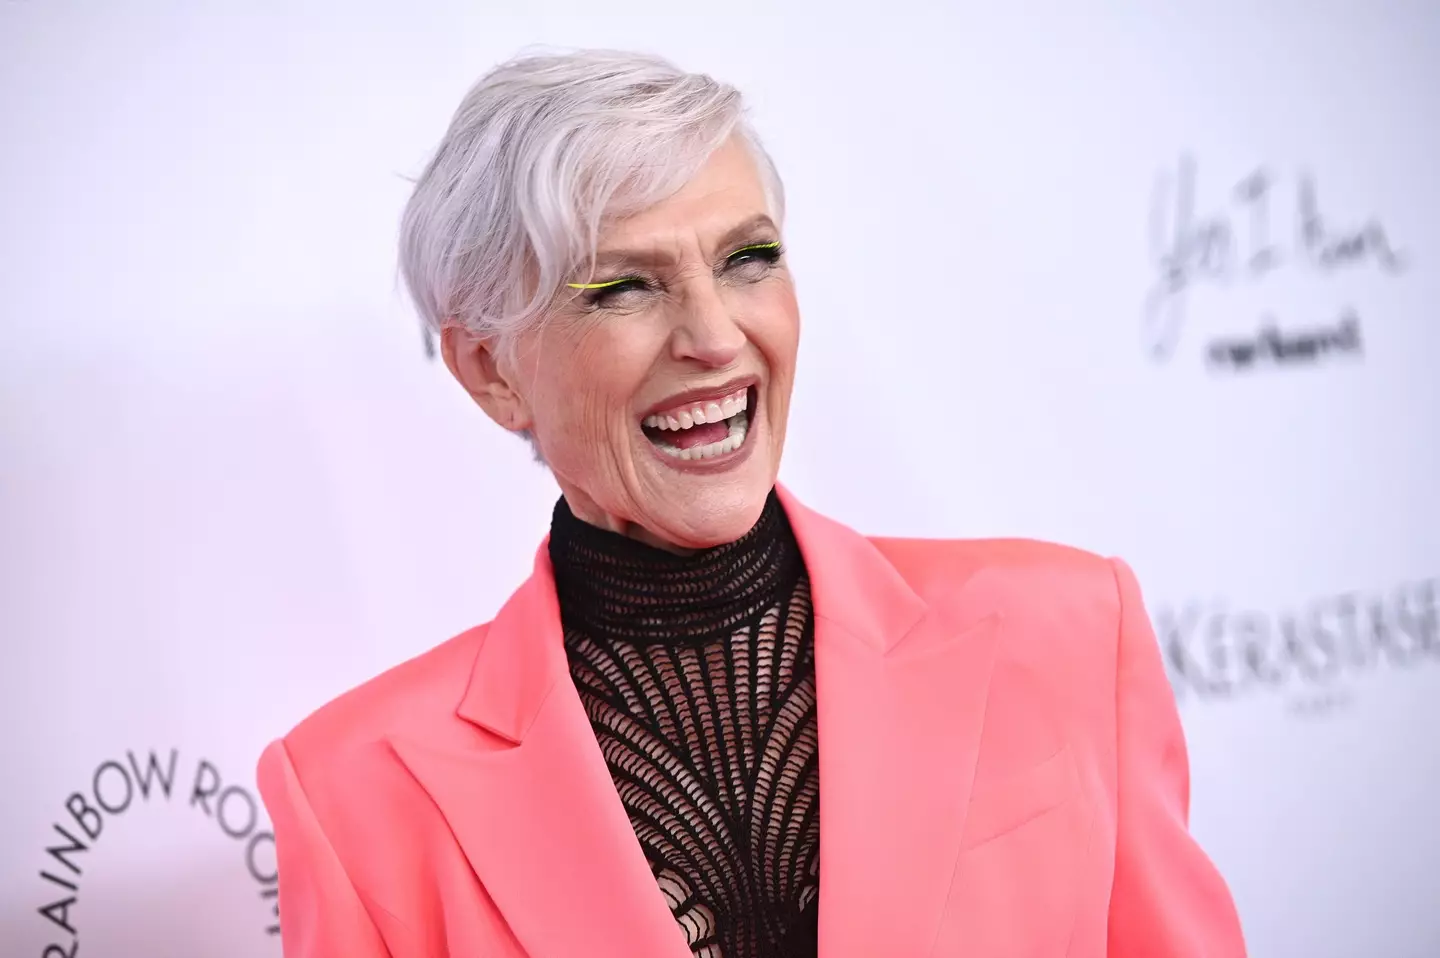 Maye Musk says she's the 'happiest' she's ever been at the age of 74.